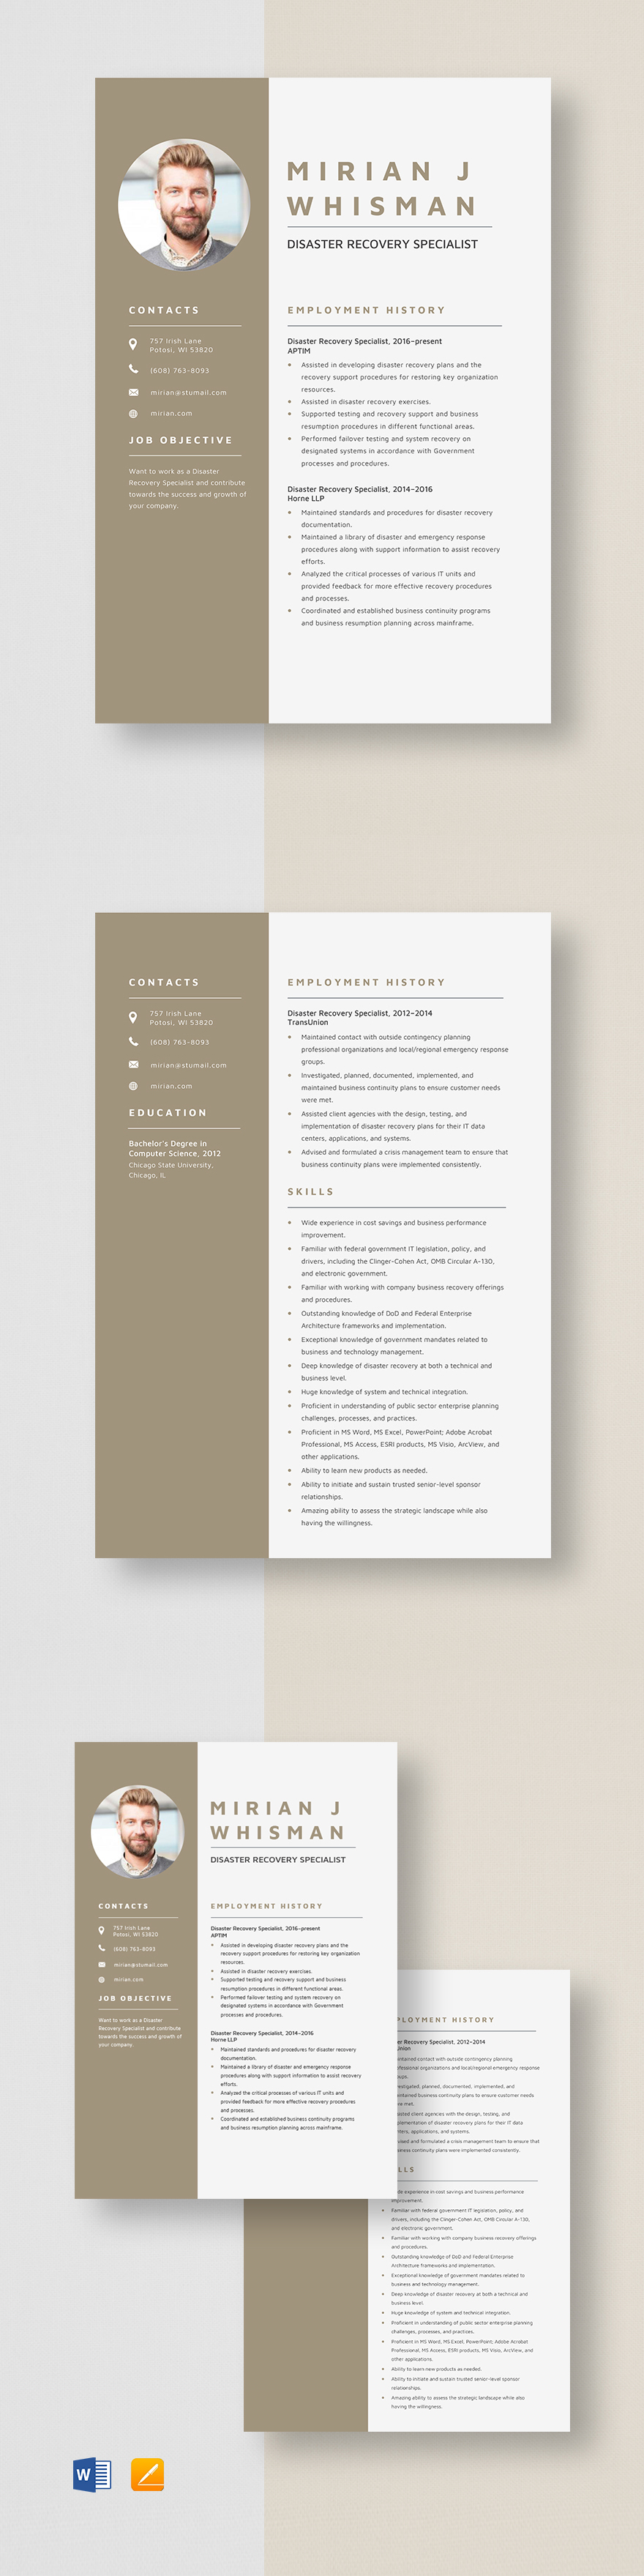 Free Disaster Recovery Specialist Resume Template